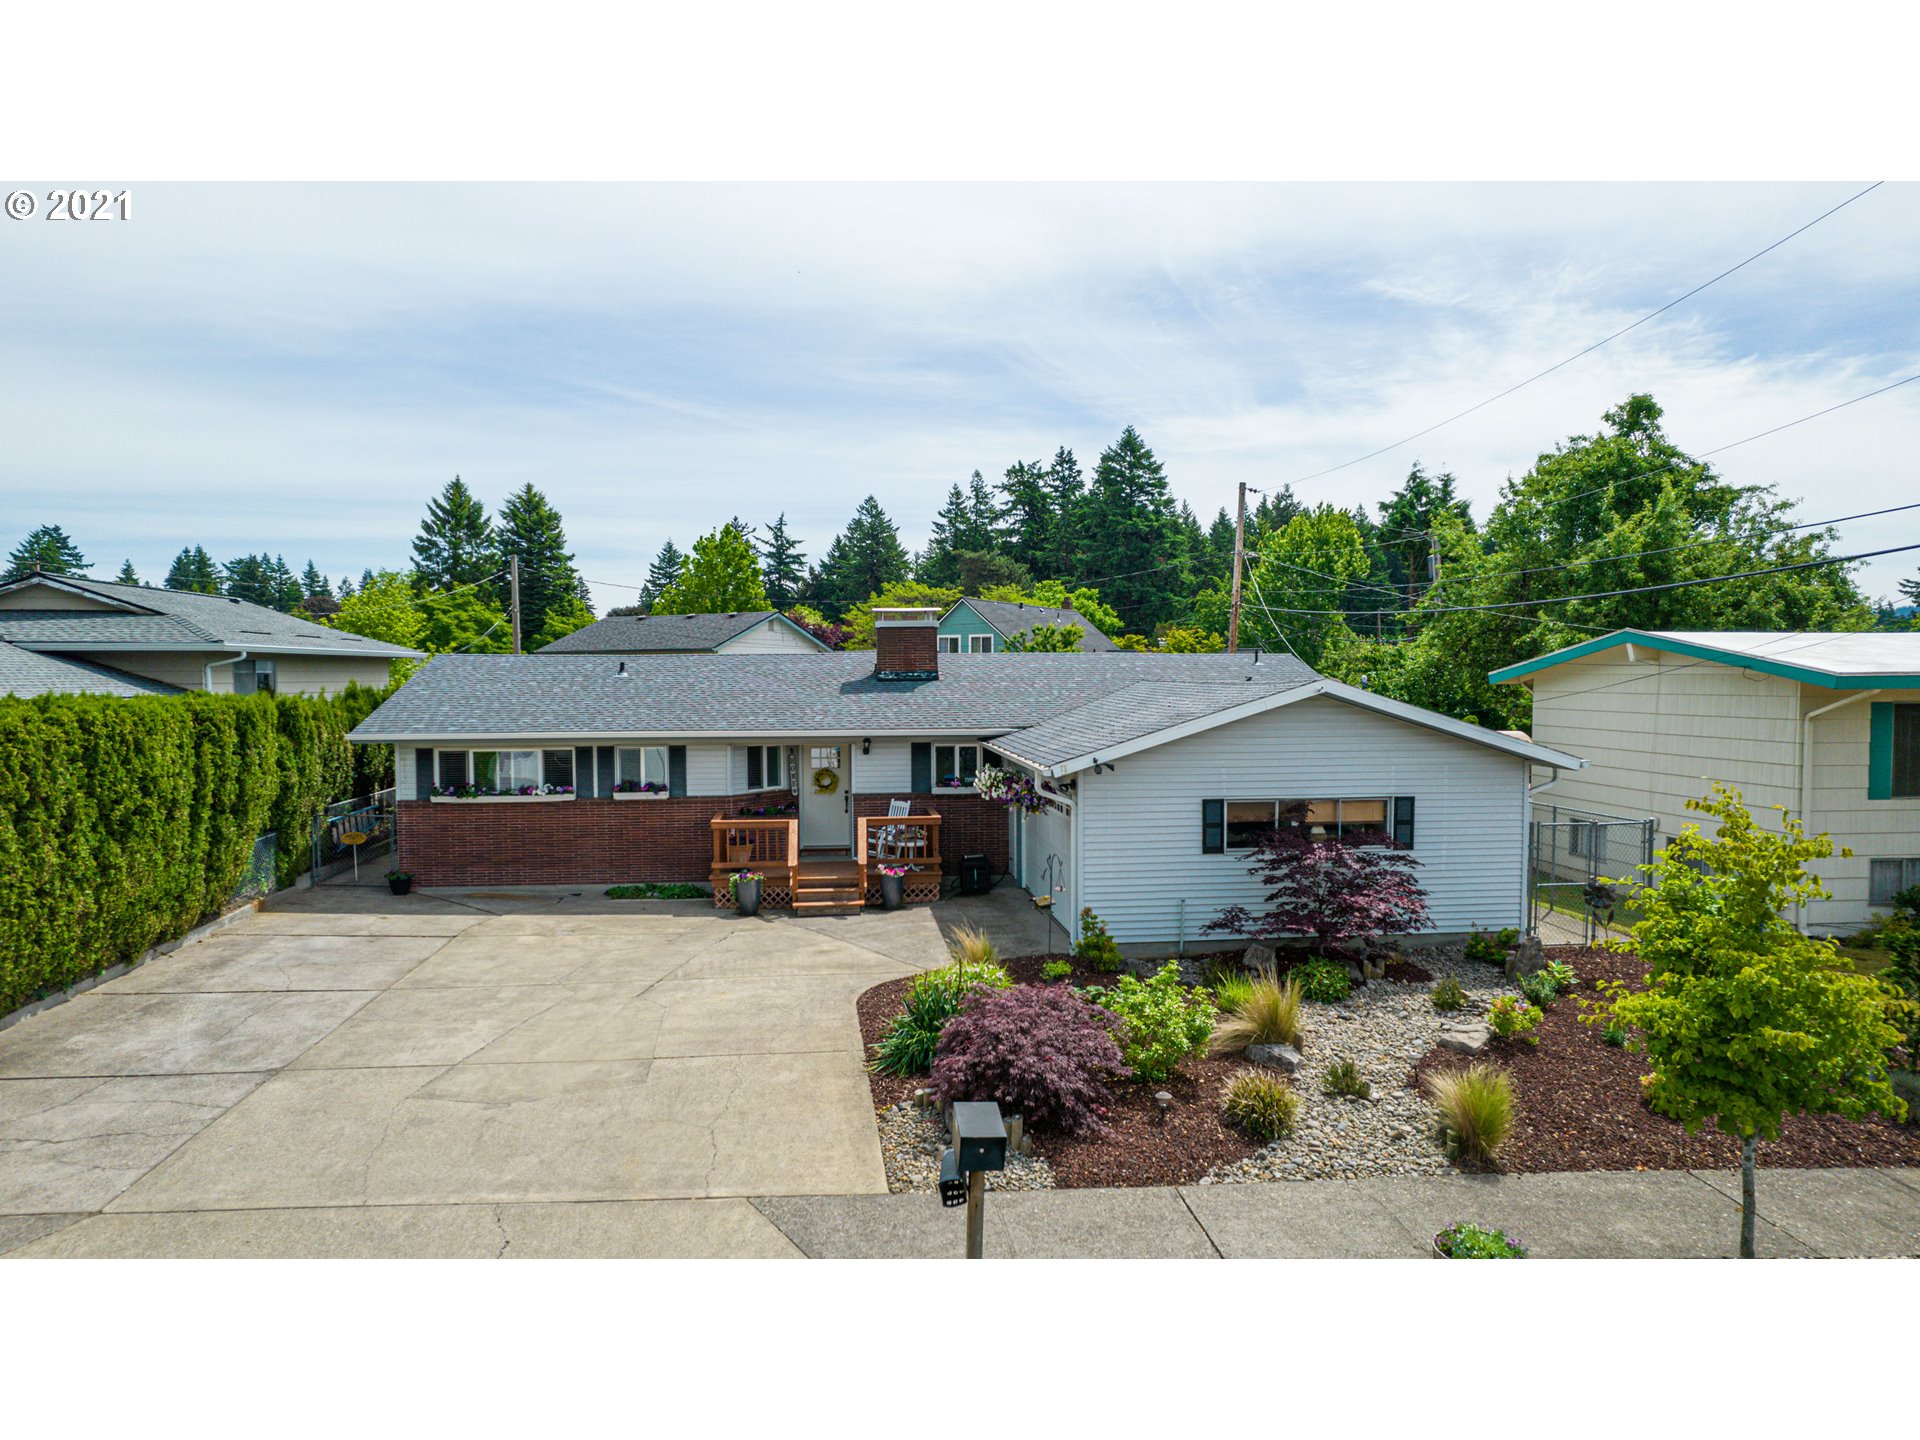 3212 SE 167TH AVE (1 of 32)